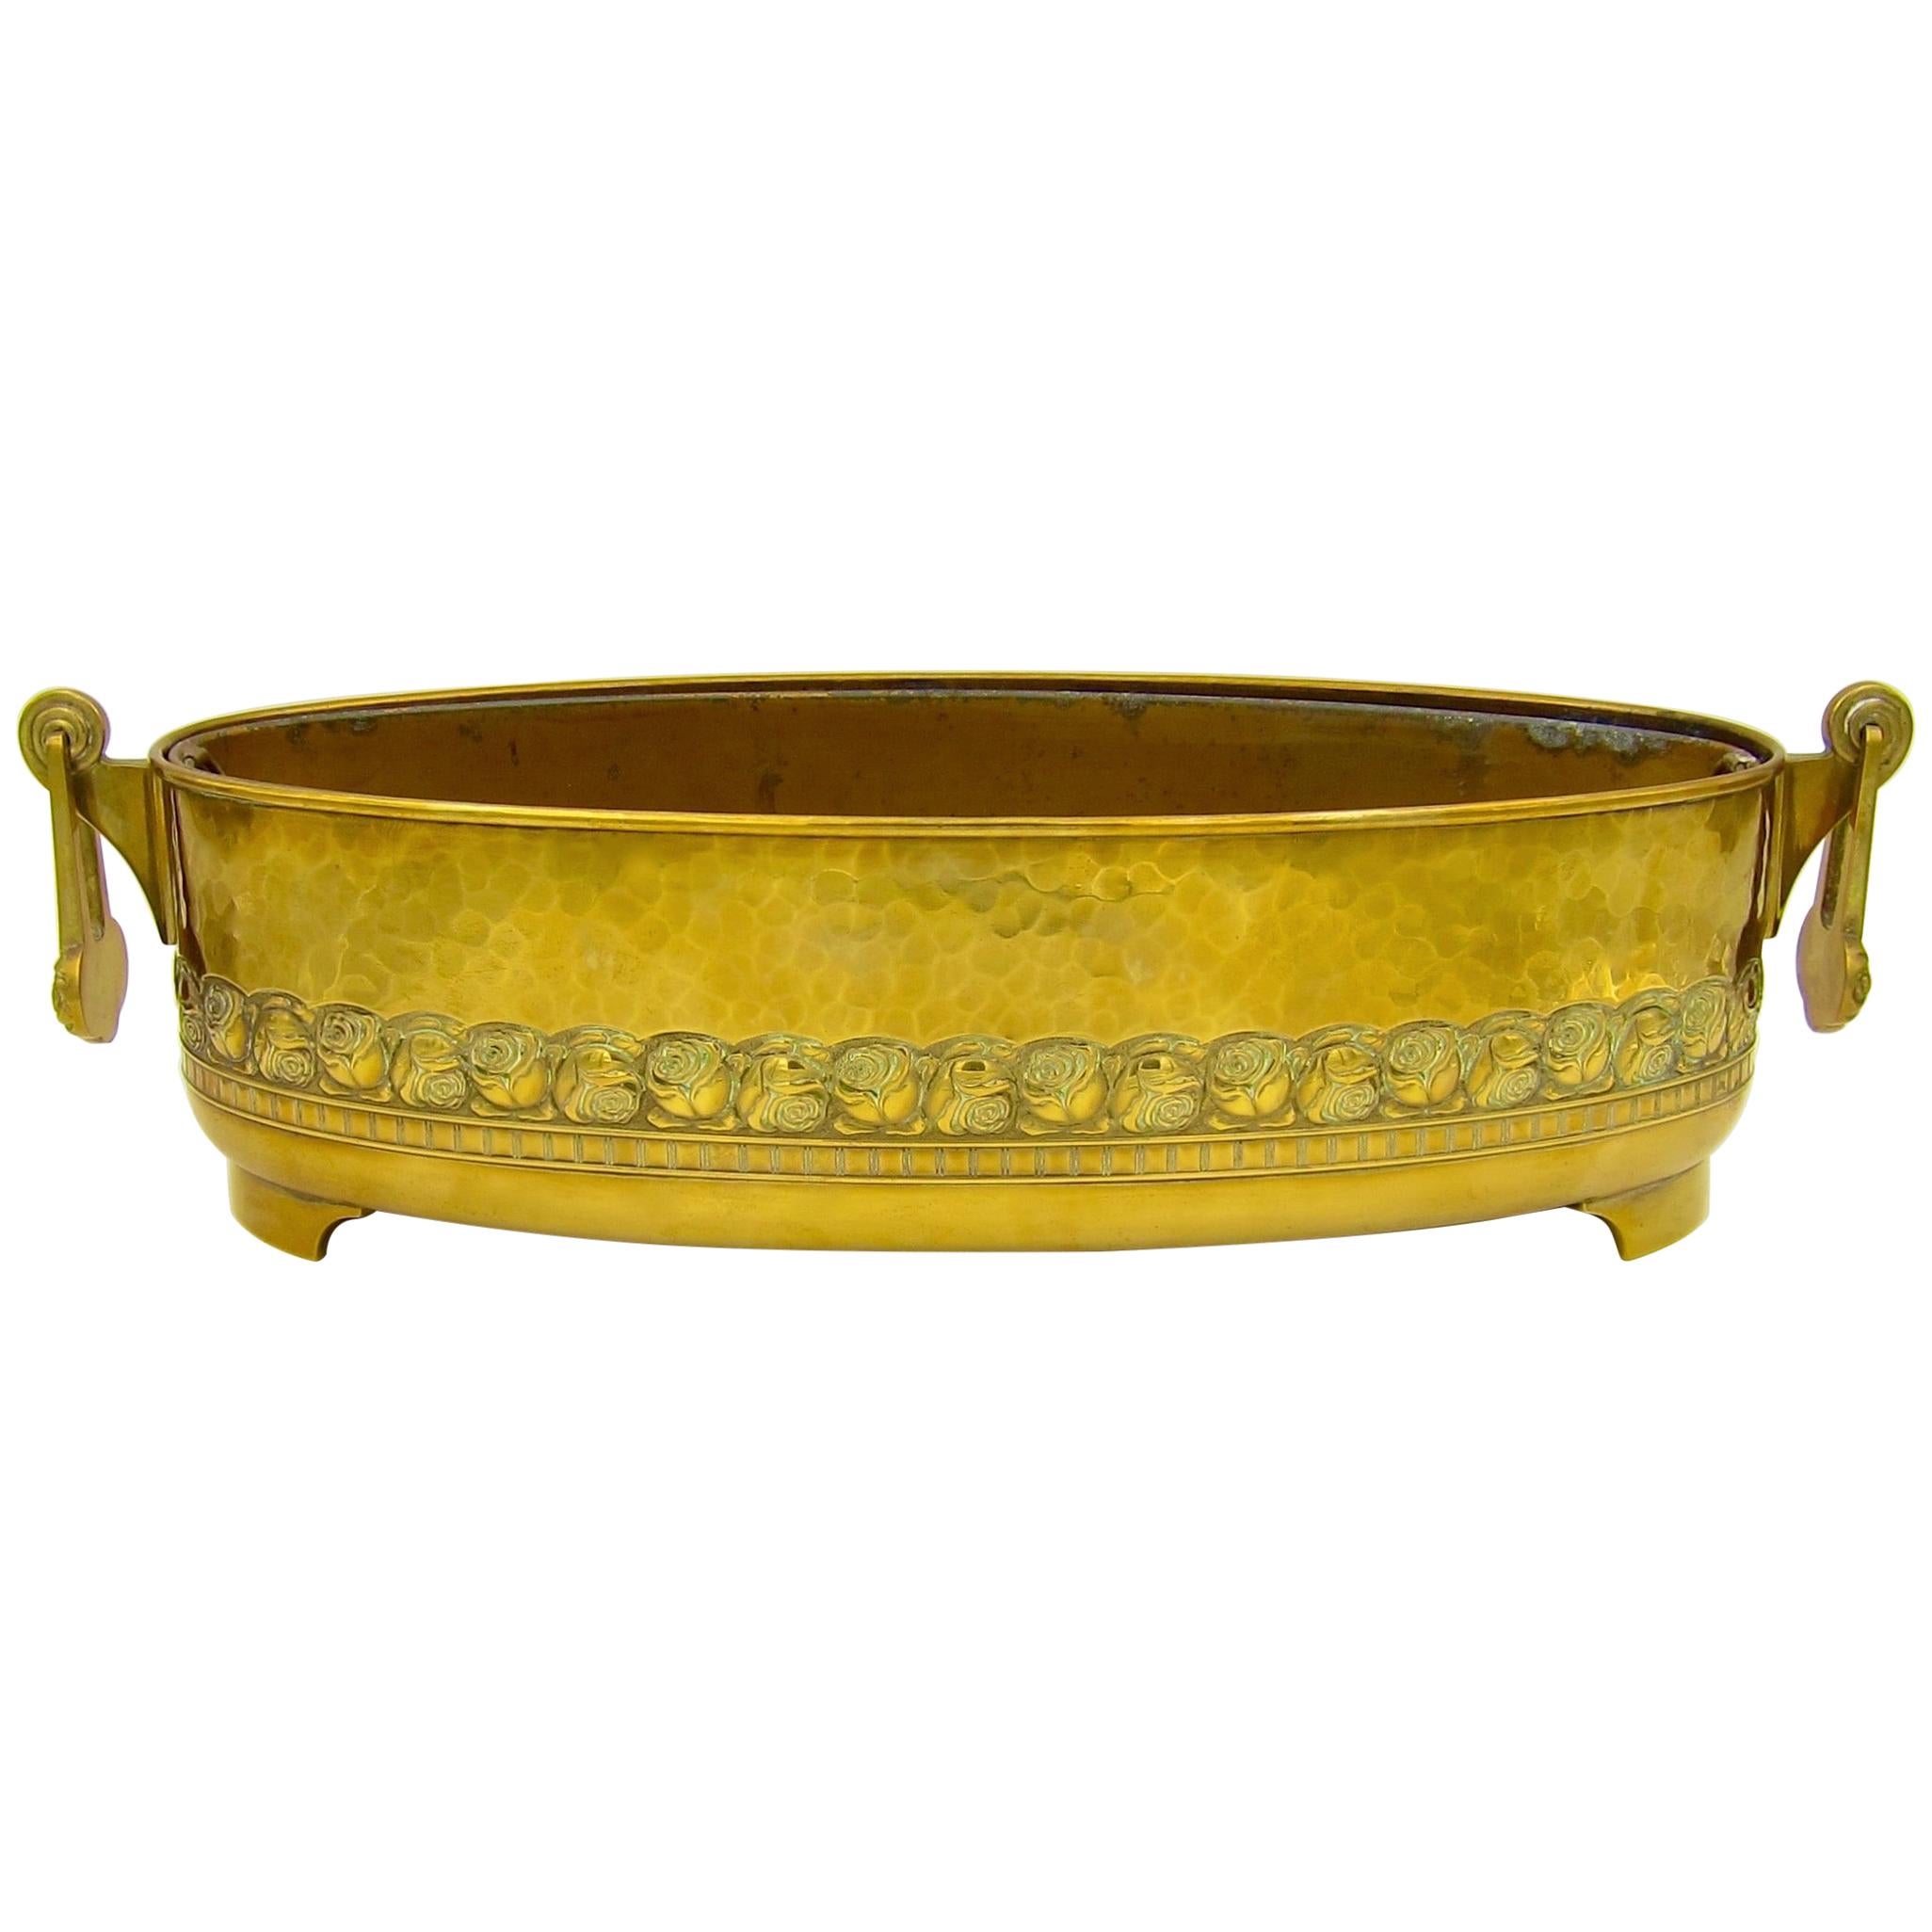 Large WMF Art Nouveau Oval Planter in Golden Yellow Brass, circa 1910